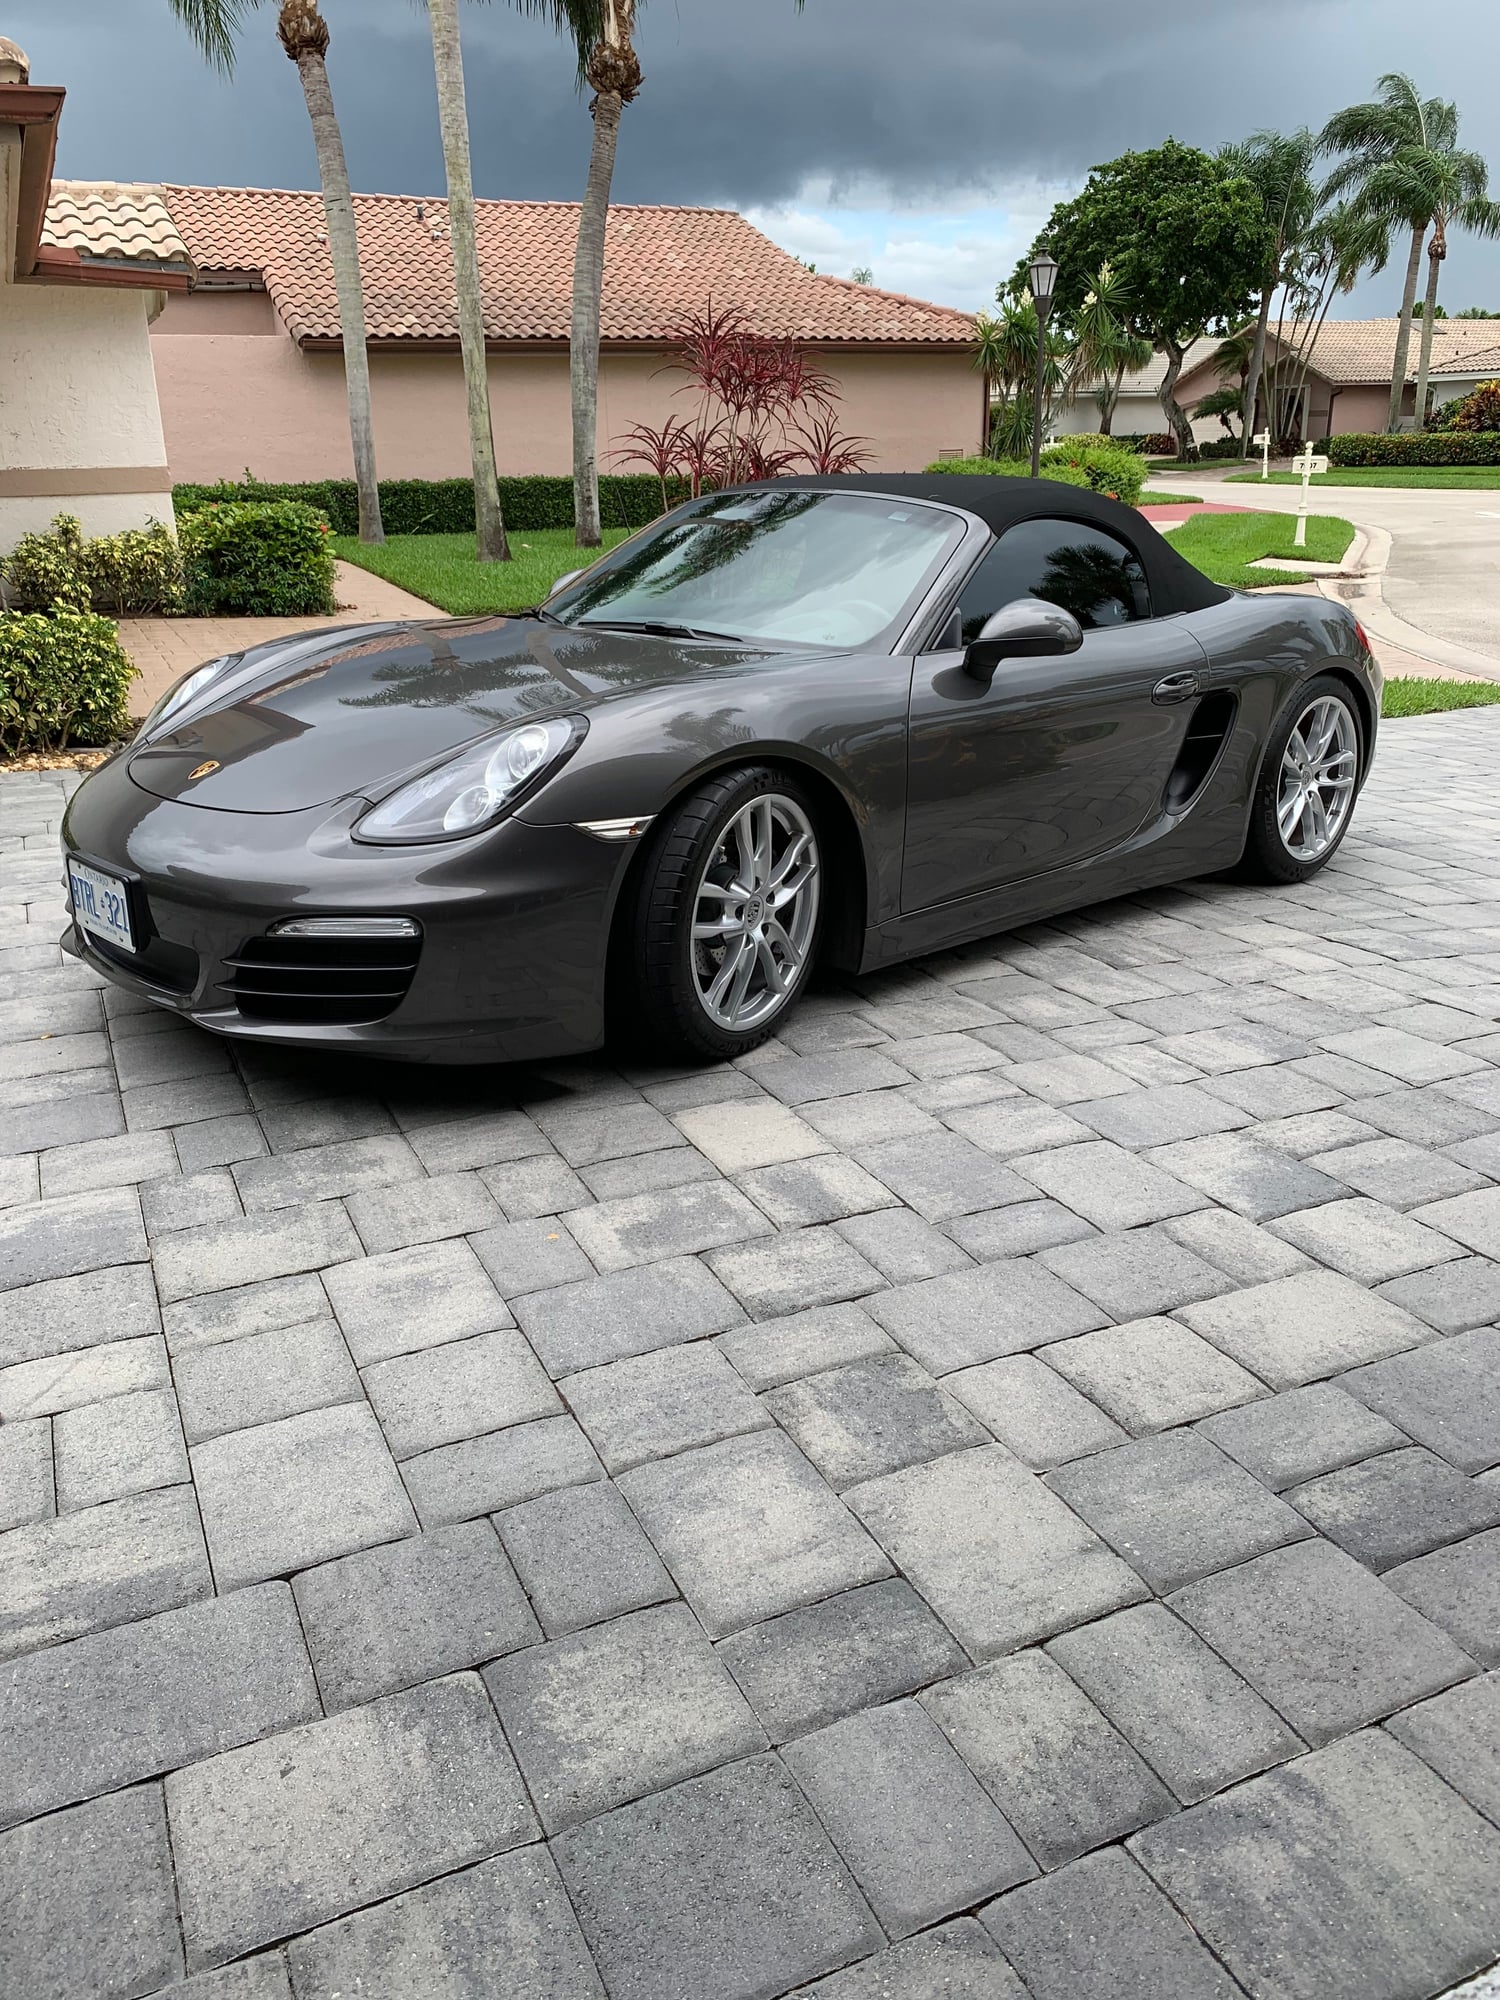 2013 Porsche Boxster - Agate Grey on black CDN car garaged in Delray Beacn - Used - VIN WP0CA2A89DS114051 - 6 cyl - 2WD - Manual - Convertible - Gray - Delray Beach, FL 33446, United States